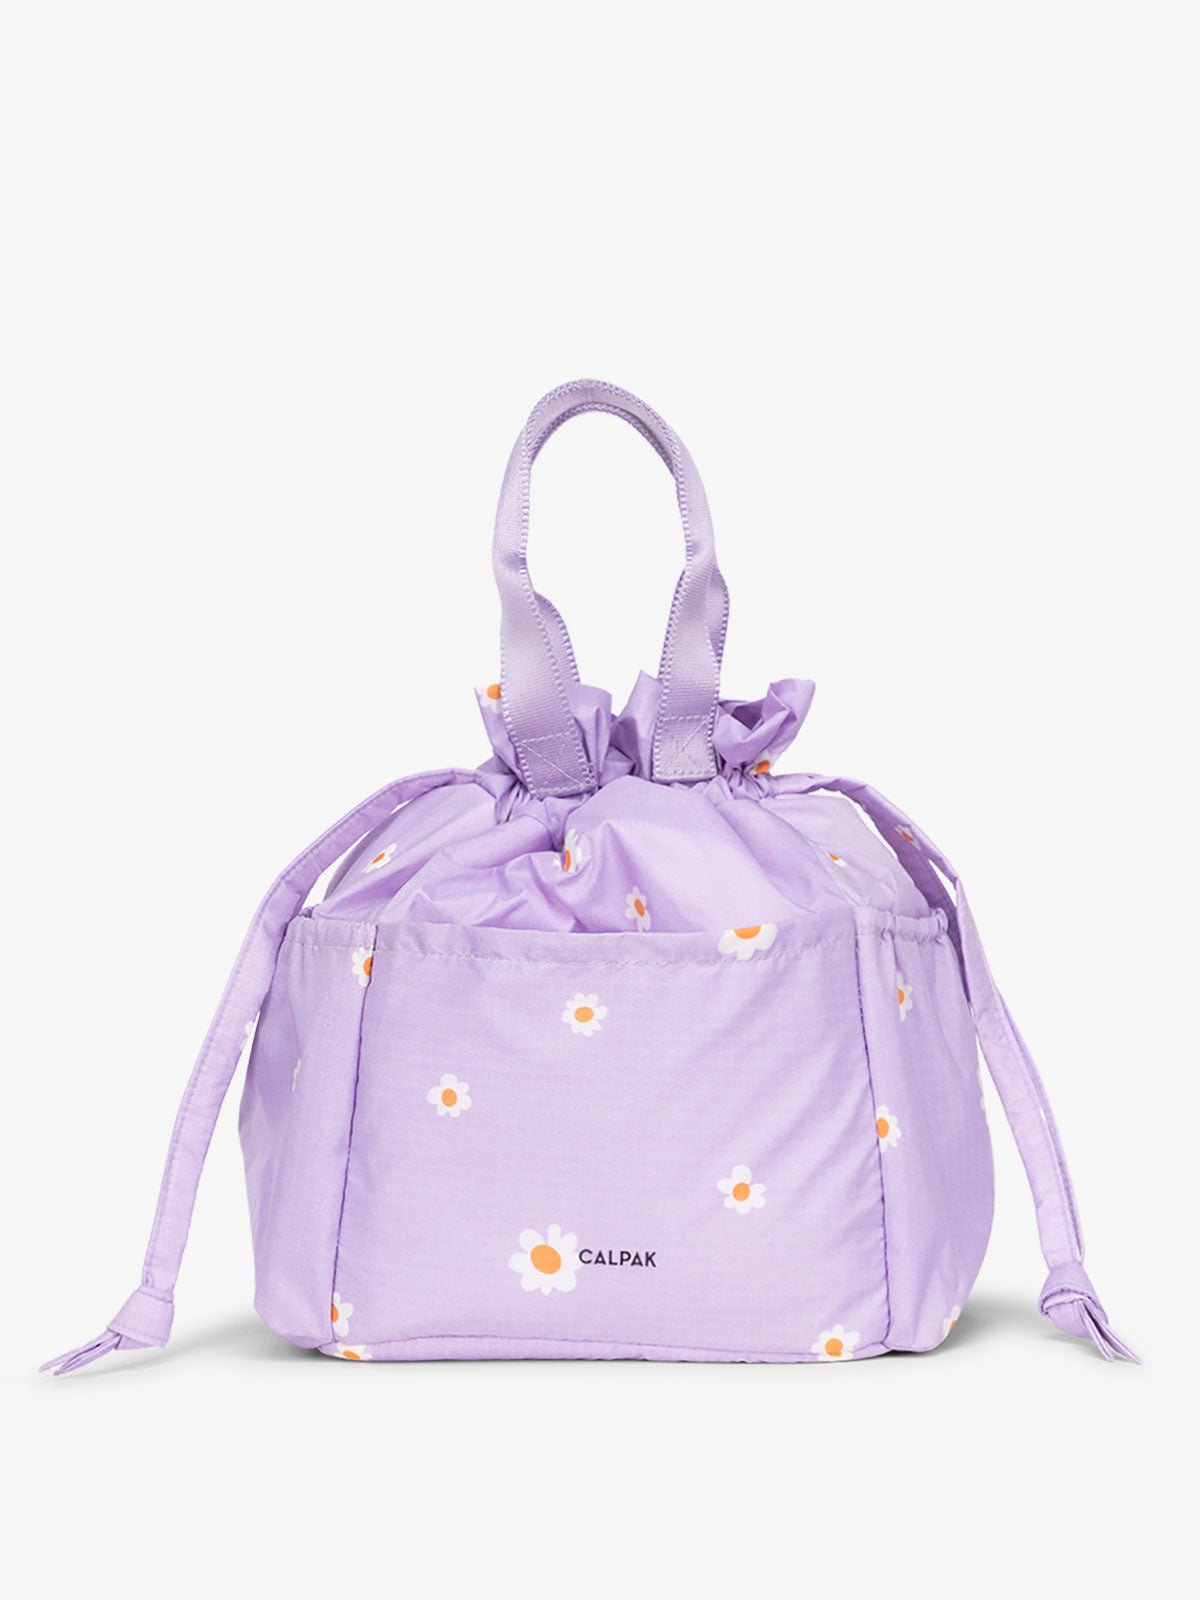 CALPAK Insulated Lunch Bag in orchid fields